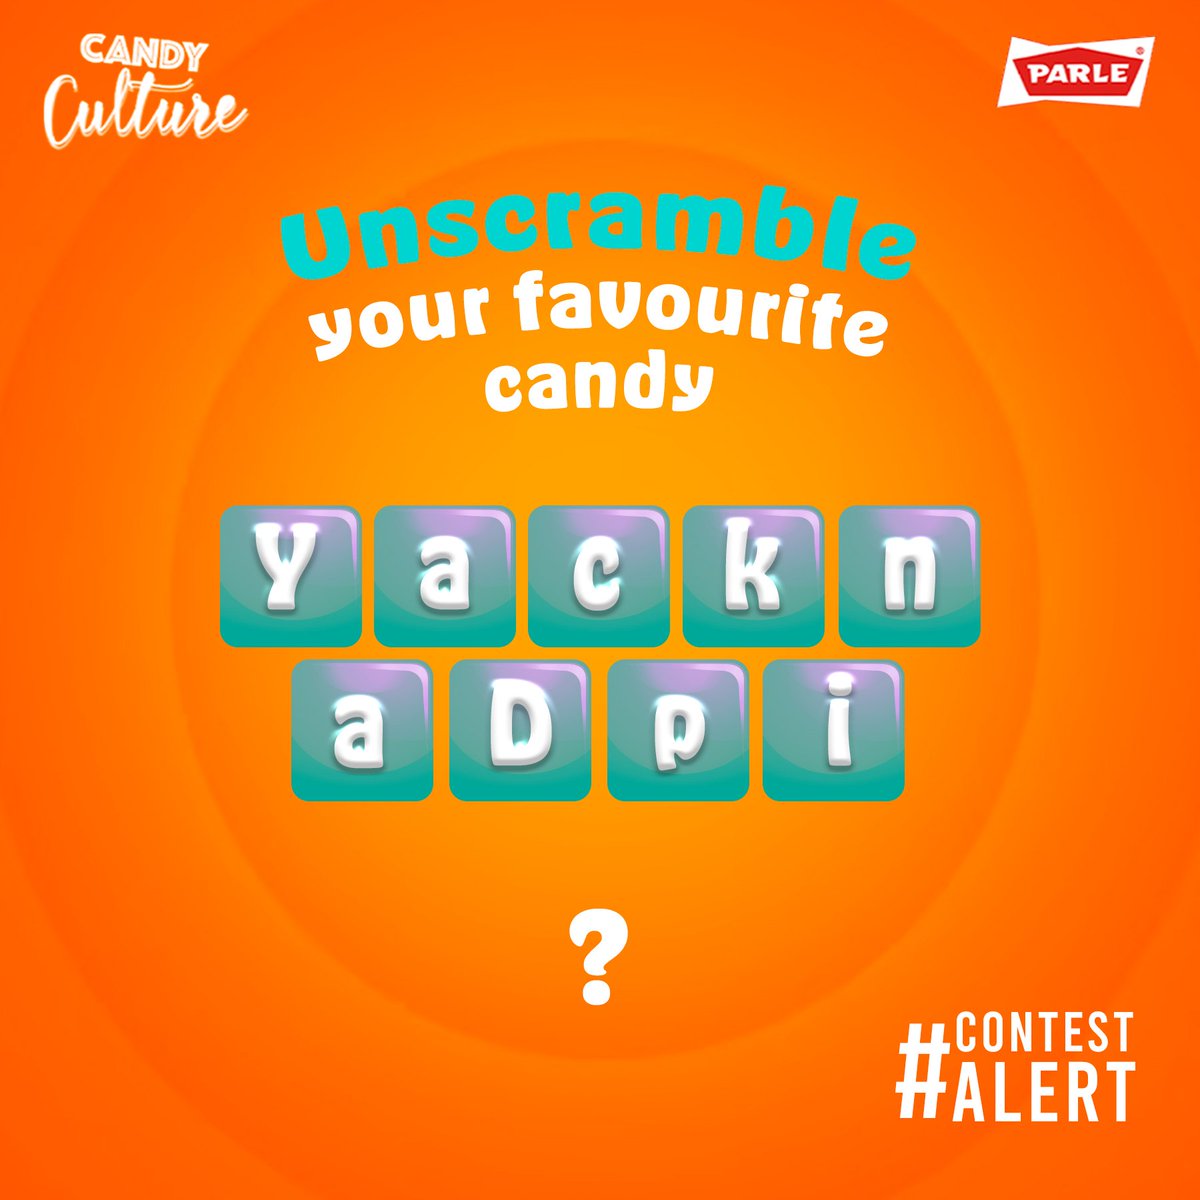 Can you unscramble your favourite candies? Let us know in the comments if you have guessed it right. Top 3 contestants who unscramble first on all the posts, get a chance to win an exciting prize. Rules to participate: 1. Follow our handle 2. Tag 5 friends who should participate